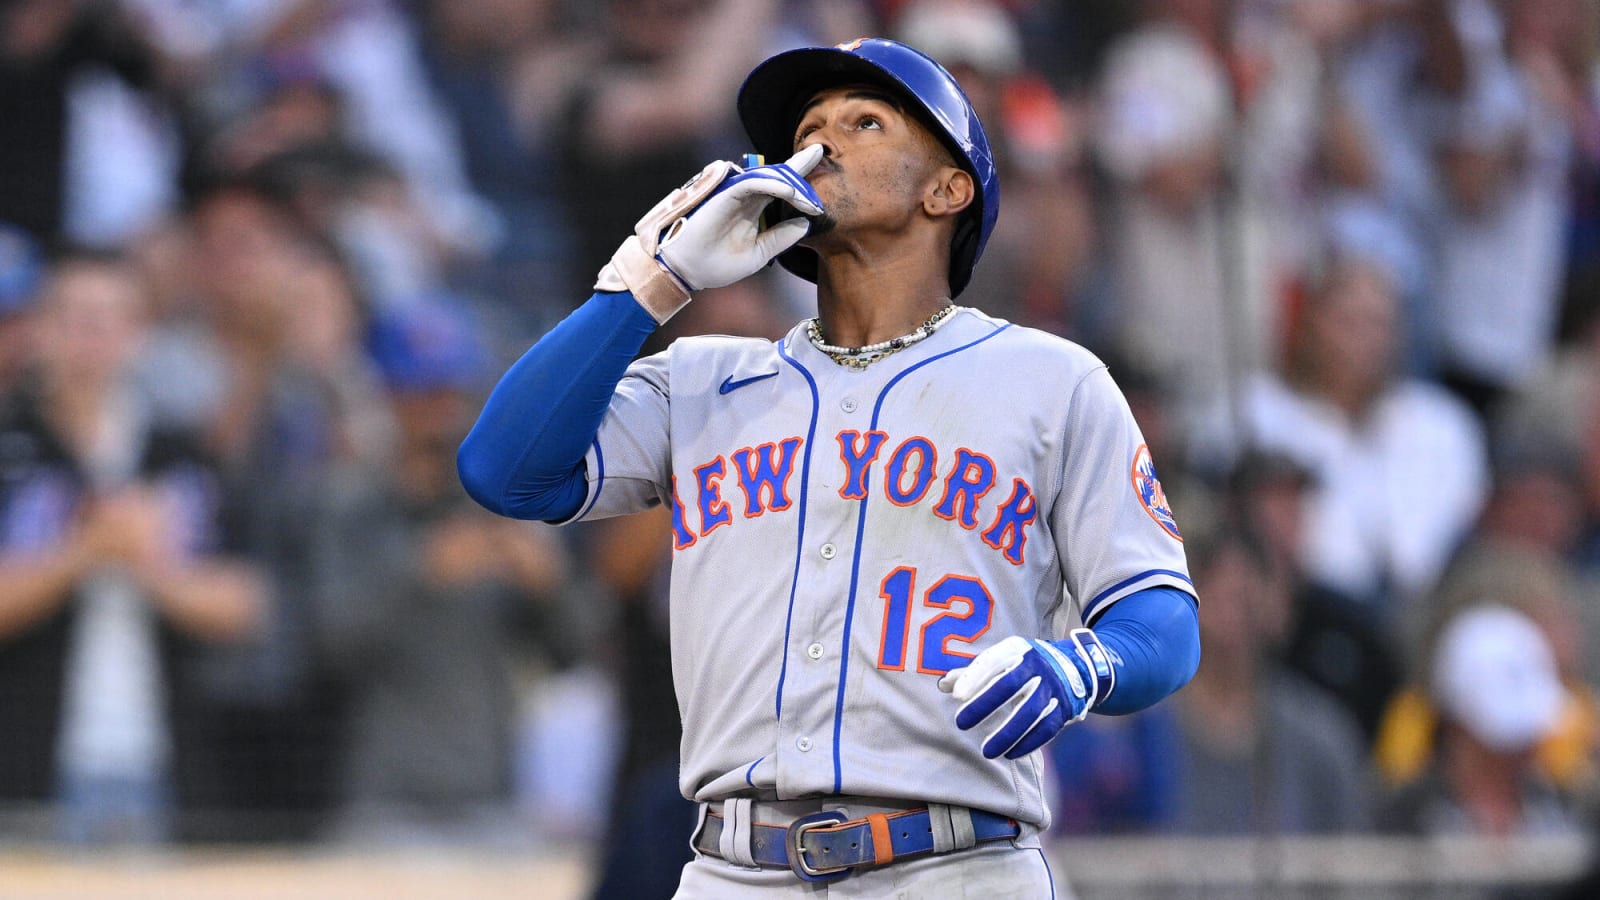 The Mets’ $32 million infielder is carrying his weight